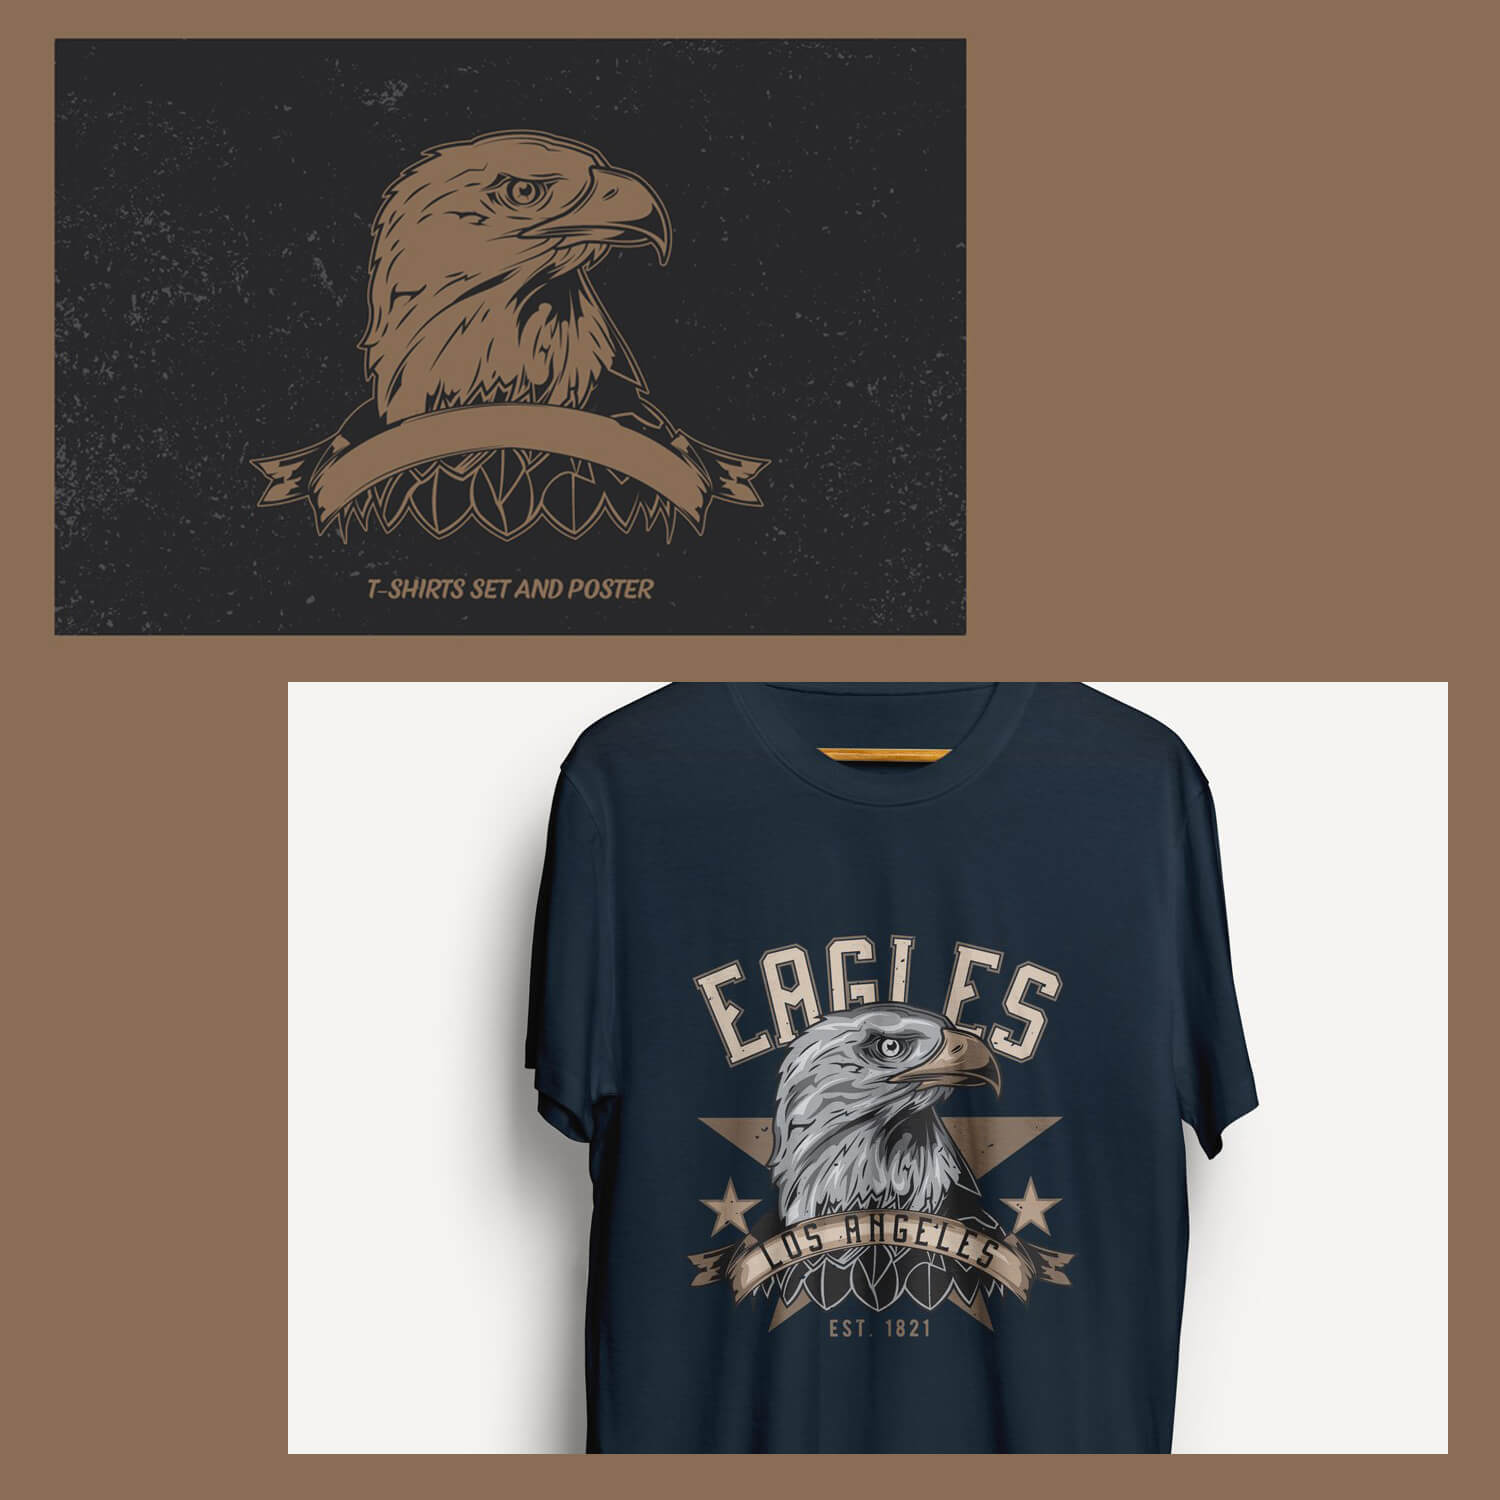 The image is divided into two parts with an offset, a blue T-shirt and a poster with an eagle image.